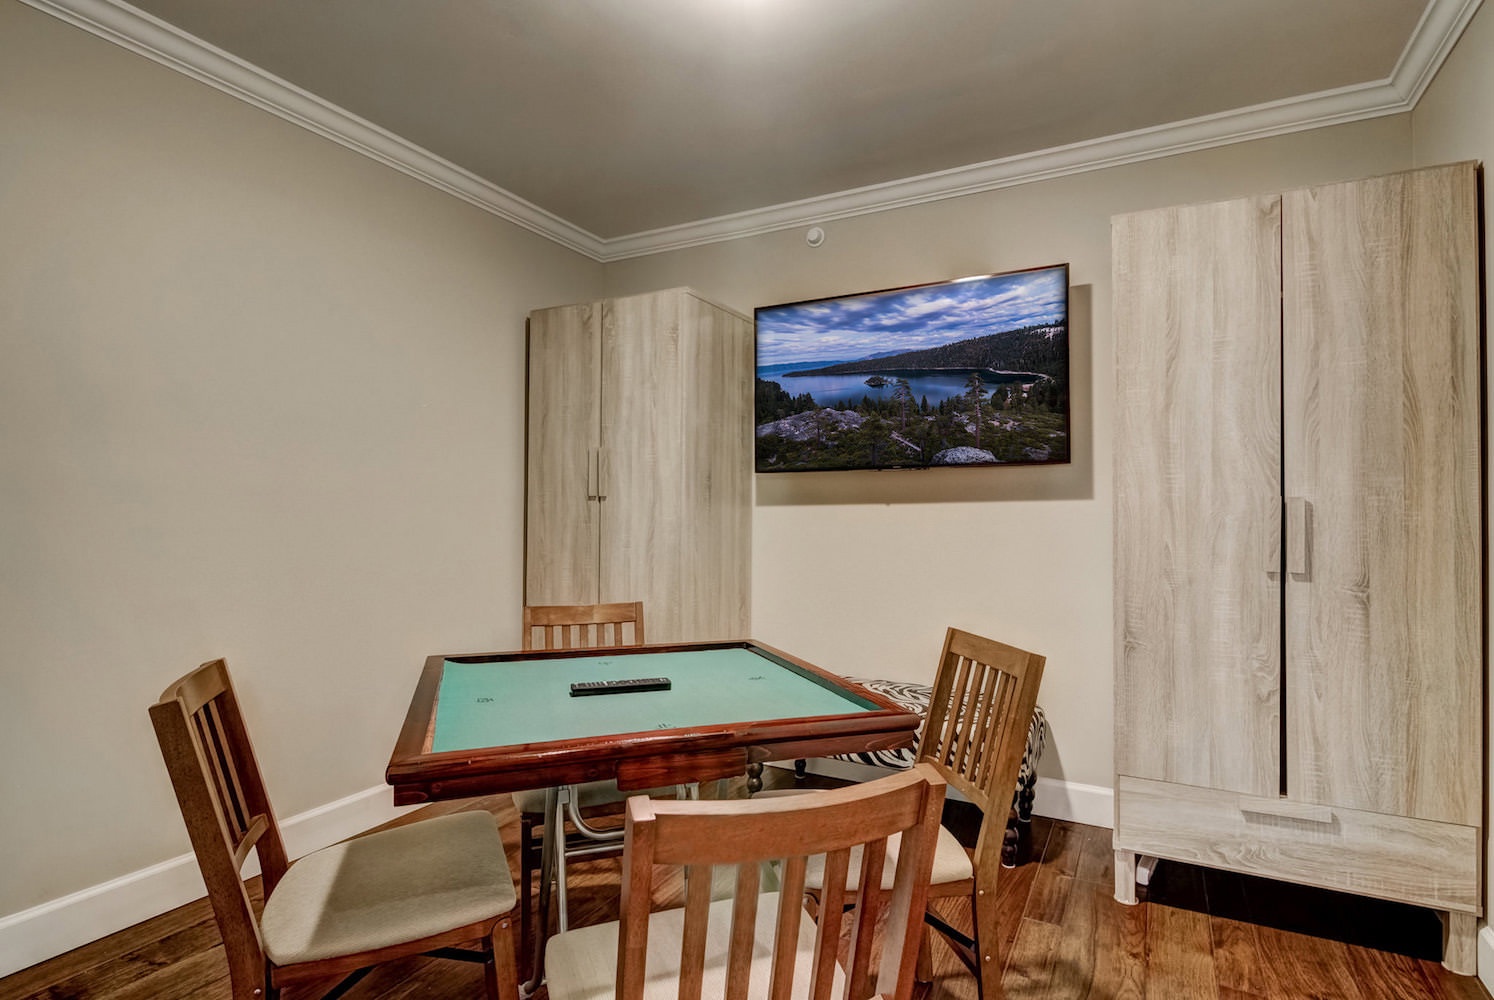 Game room w/ Smart TV, card table